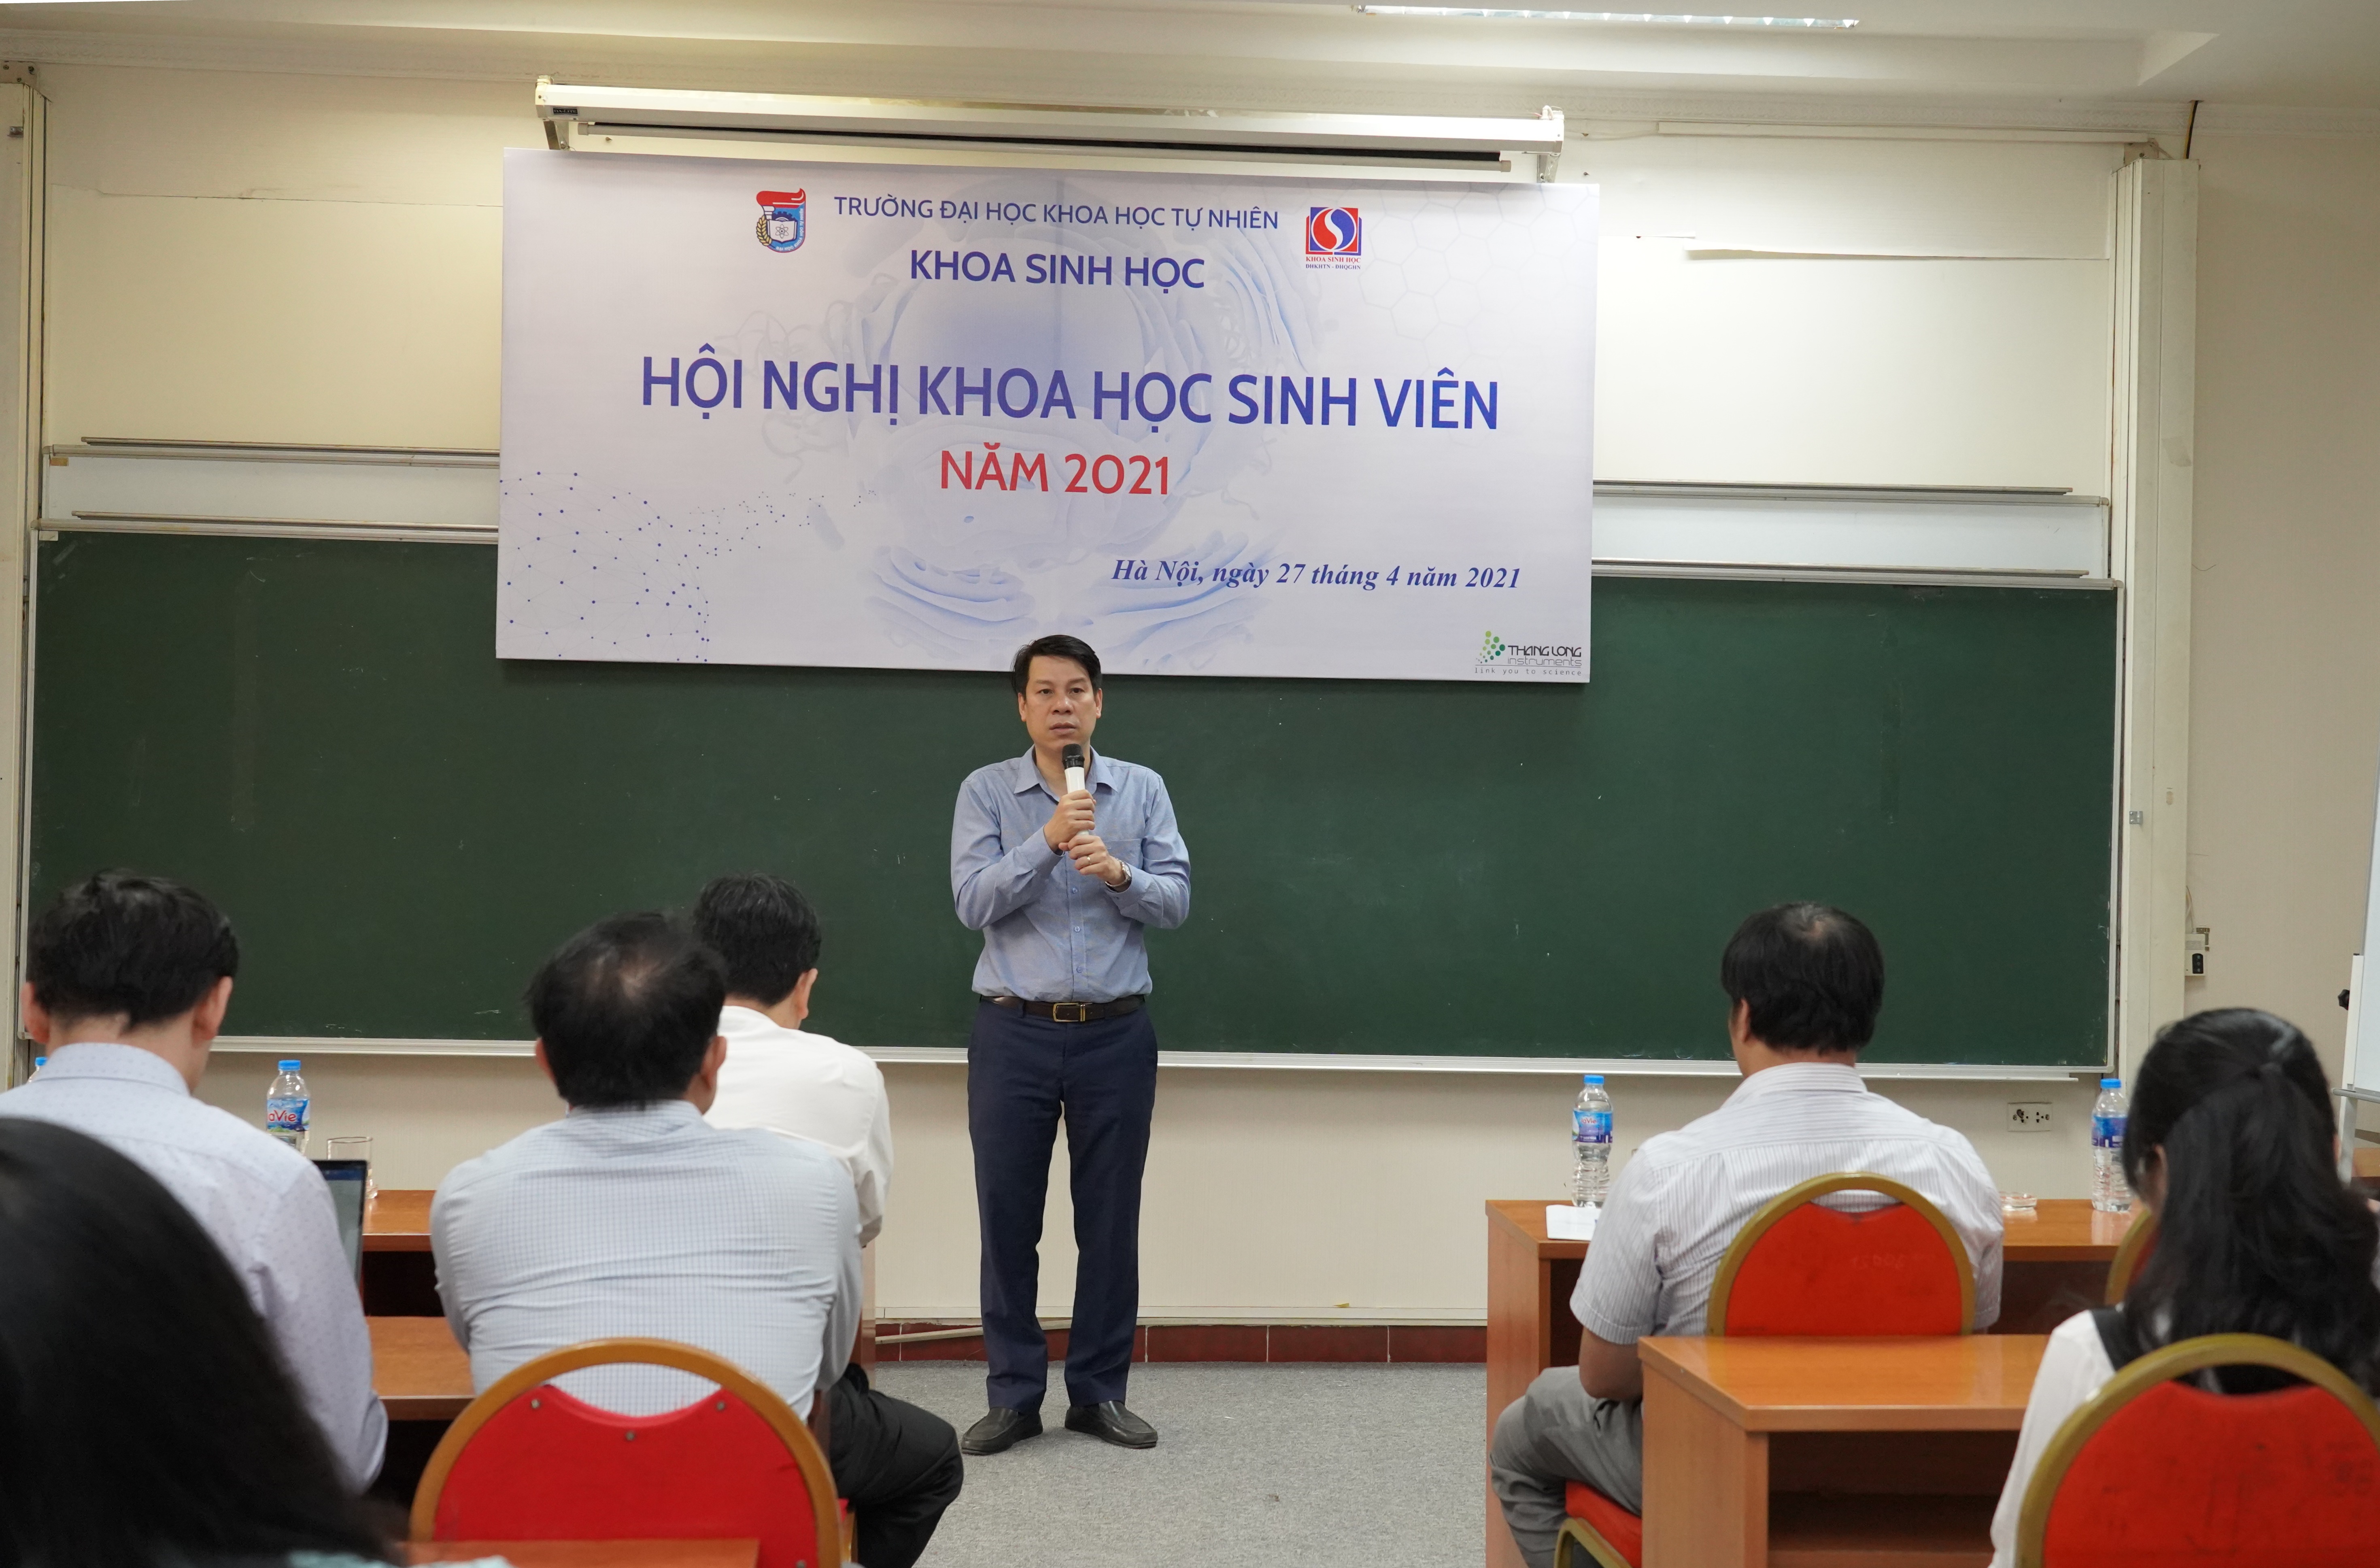 2021 Student Scientific Conference held at the VNU University of Science